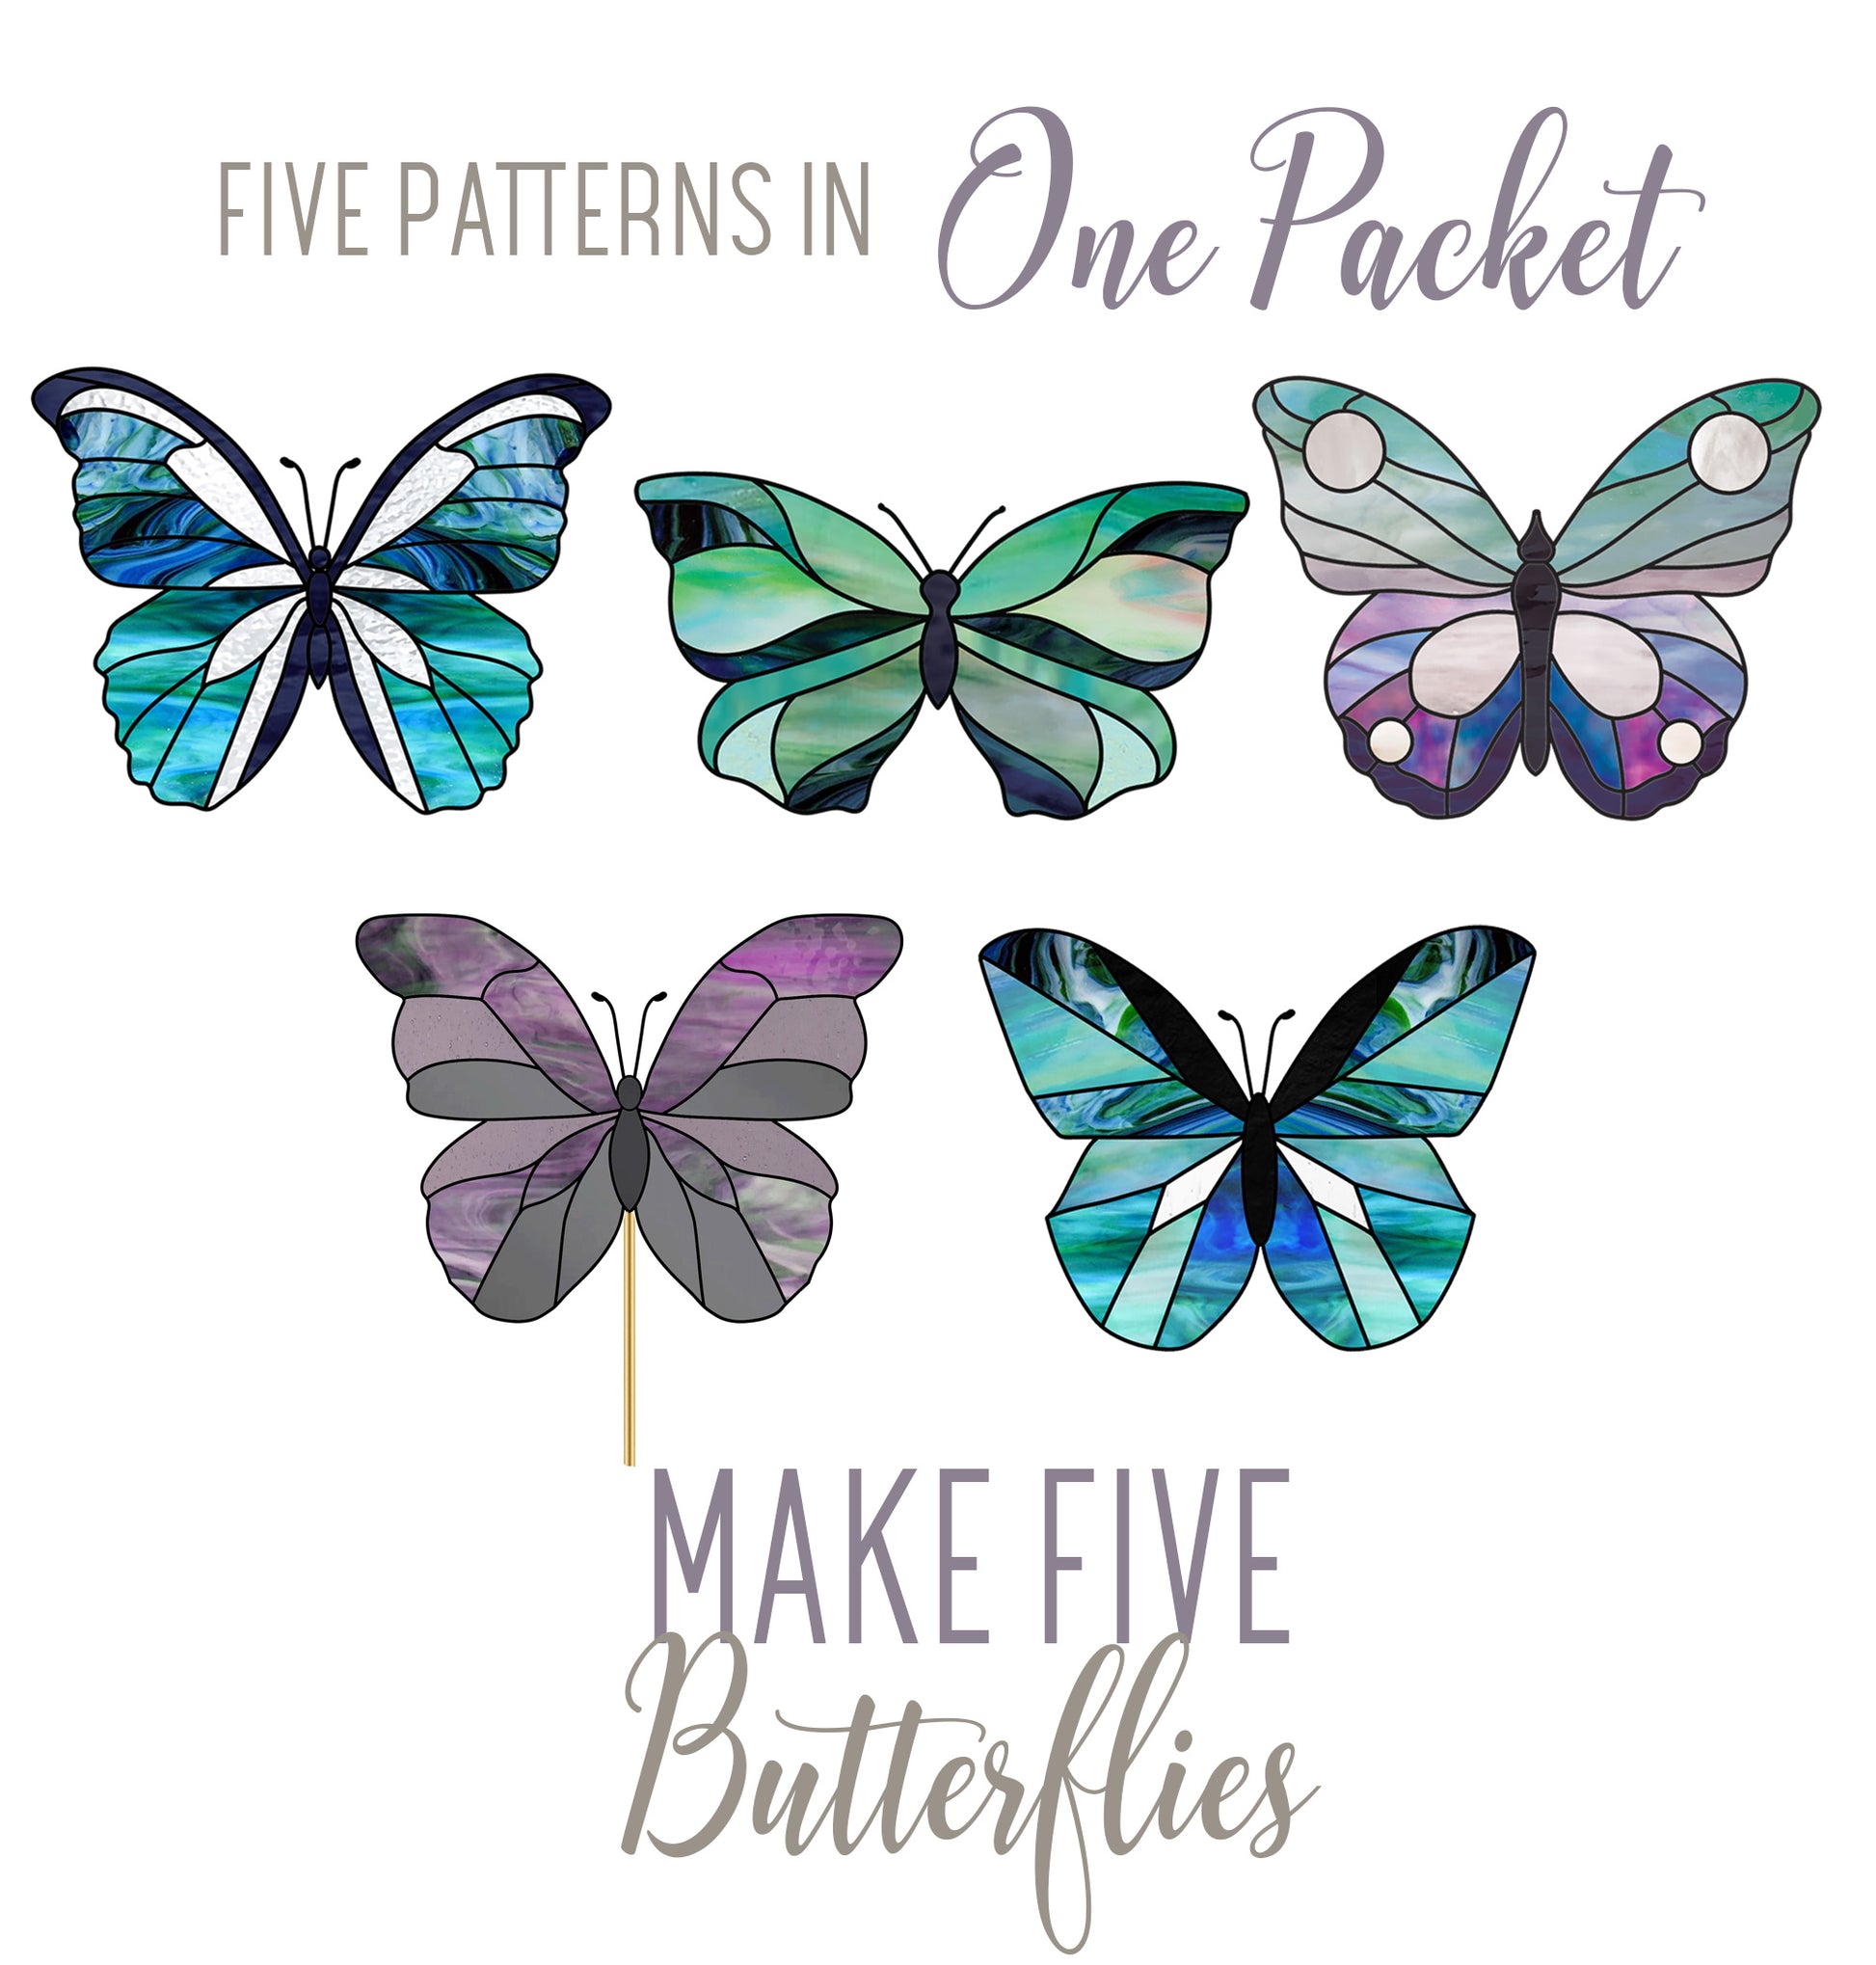 Butterfly stained glass patterns, pack of five, instant download, commercial and hobby licenses included